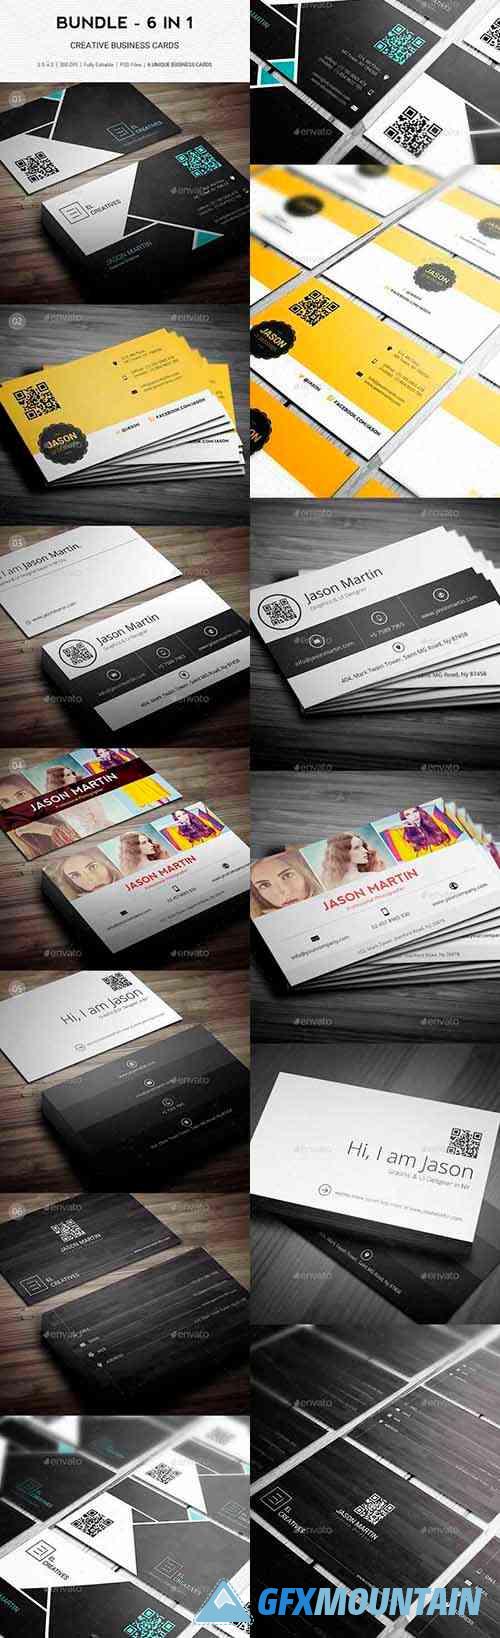 Bundle - Pro 6 in 1 - Business Cards - B39 20525050